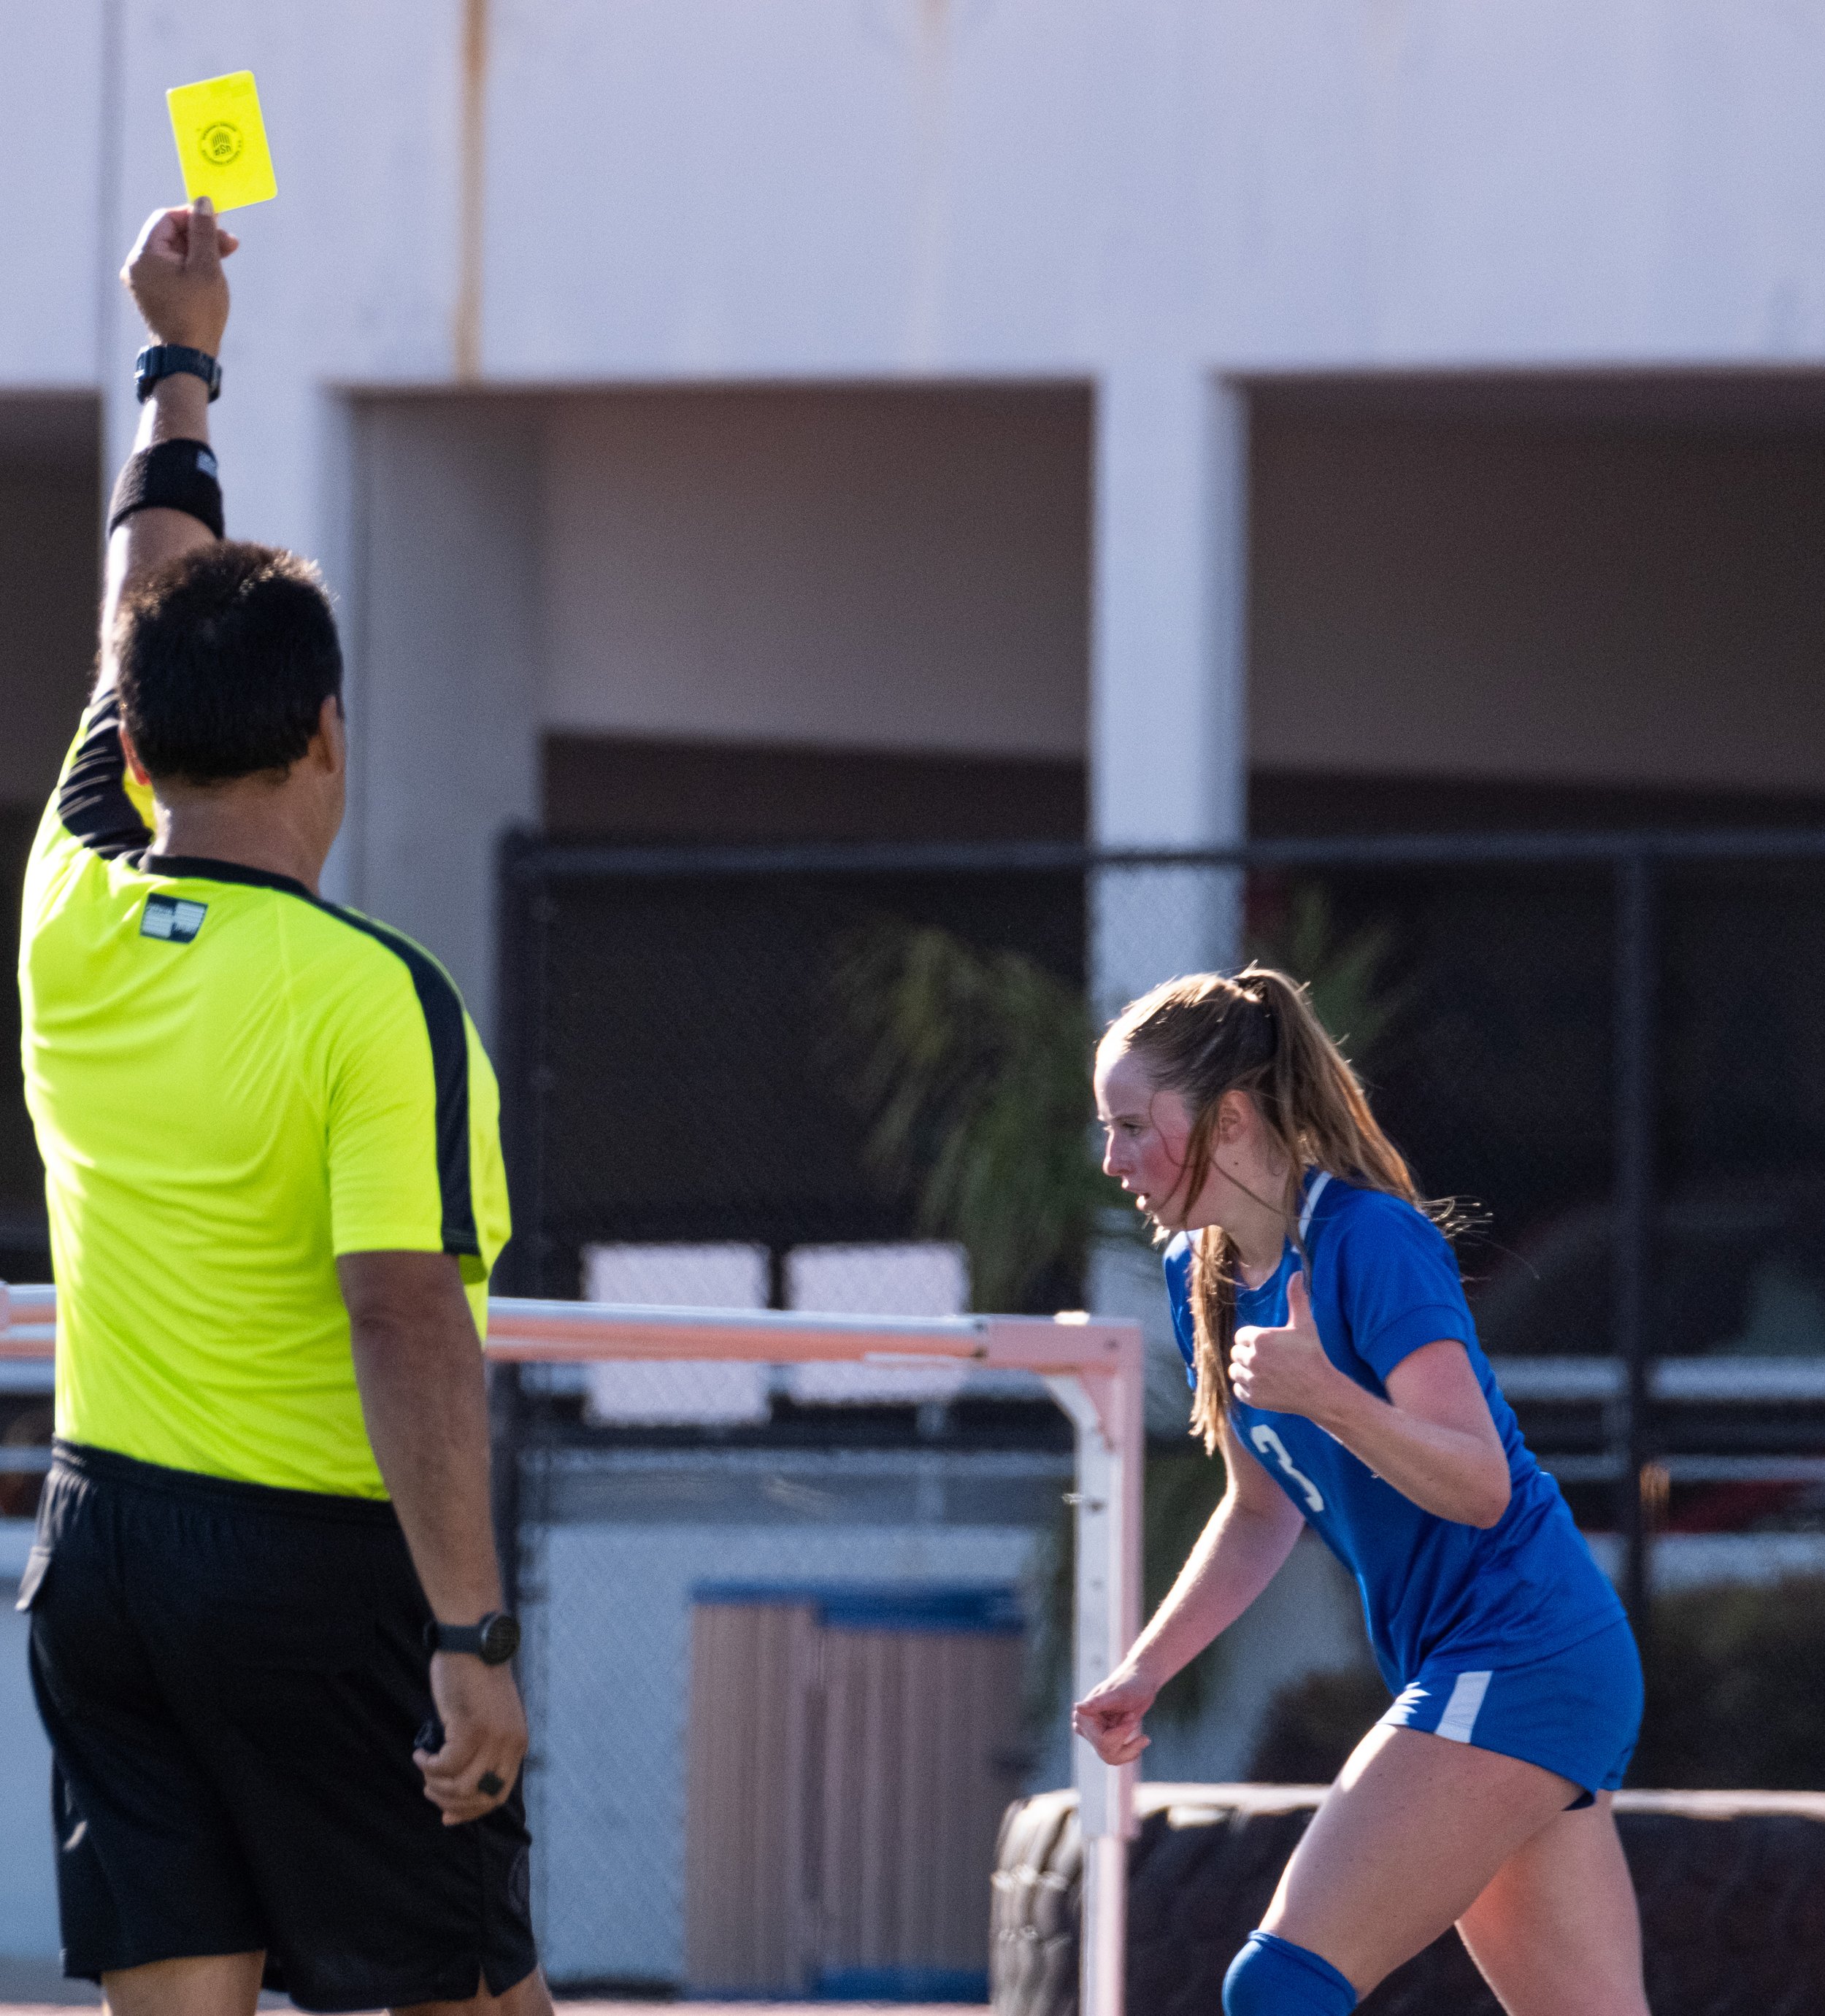  Santa Monica College defender Izzy Turner accepting her yellow card after an intentional foul against an LA Pierce player during their match on Tue. Sept. 12 on Corsair Field at Santa Monica, Calif. (Danilo Perez | The Corsair) 